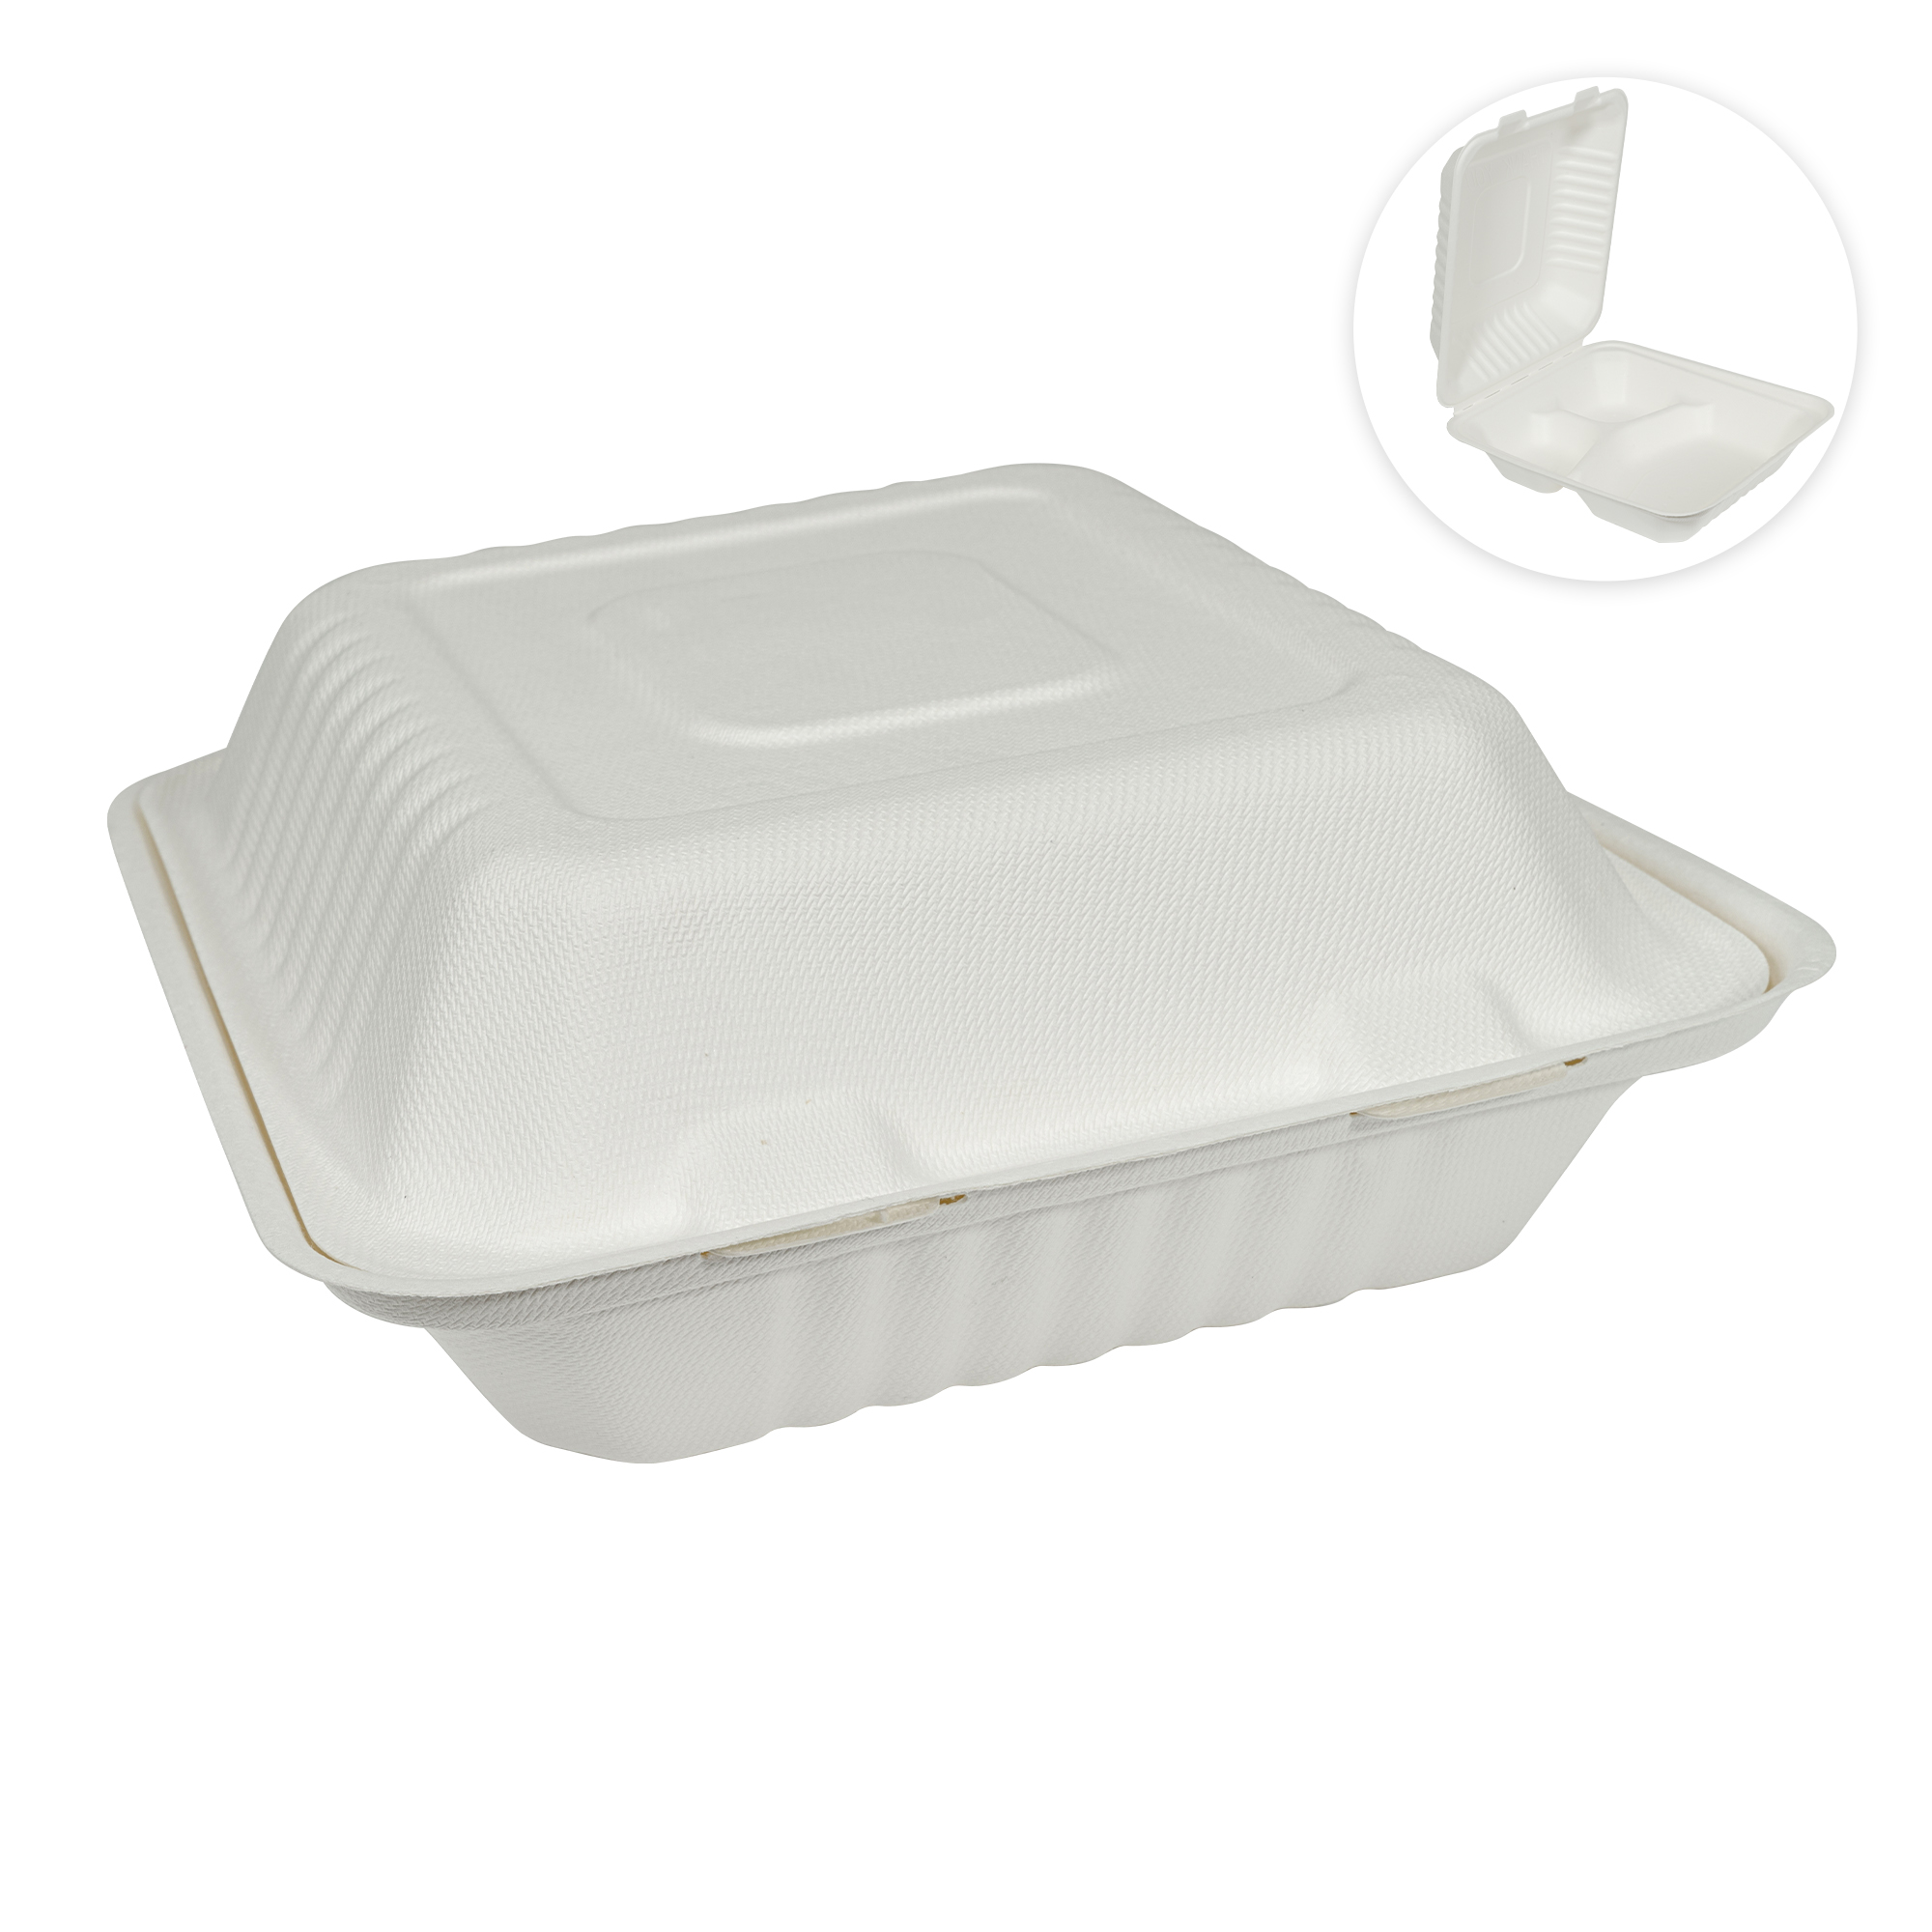 Square 3-Compartment Compostable Fiber Hinged Container 8" 50pc/pack - White